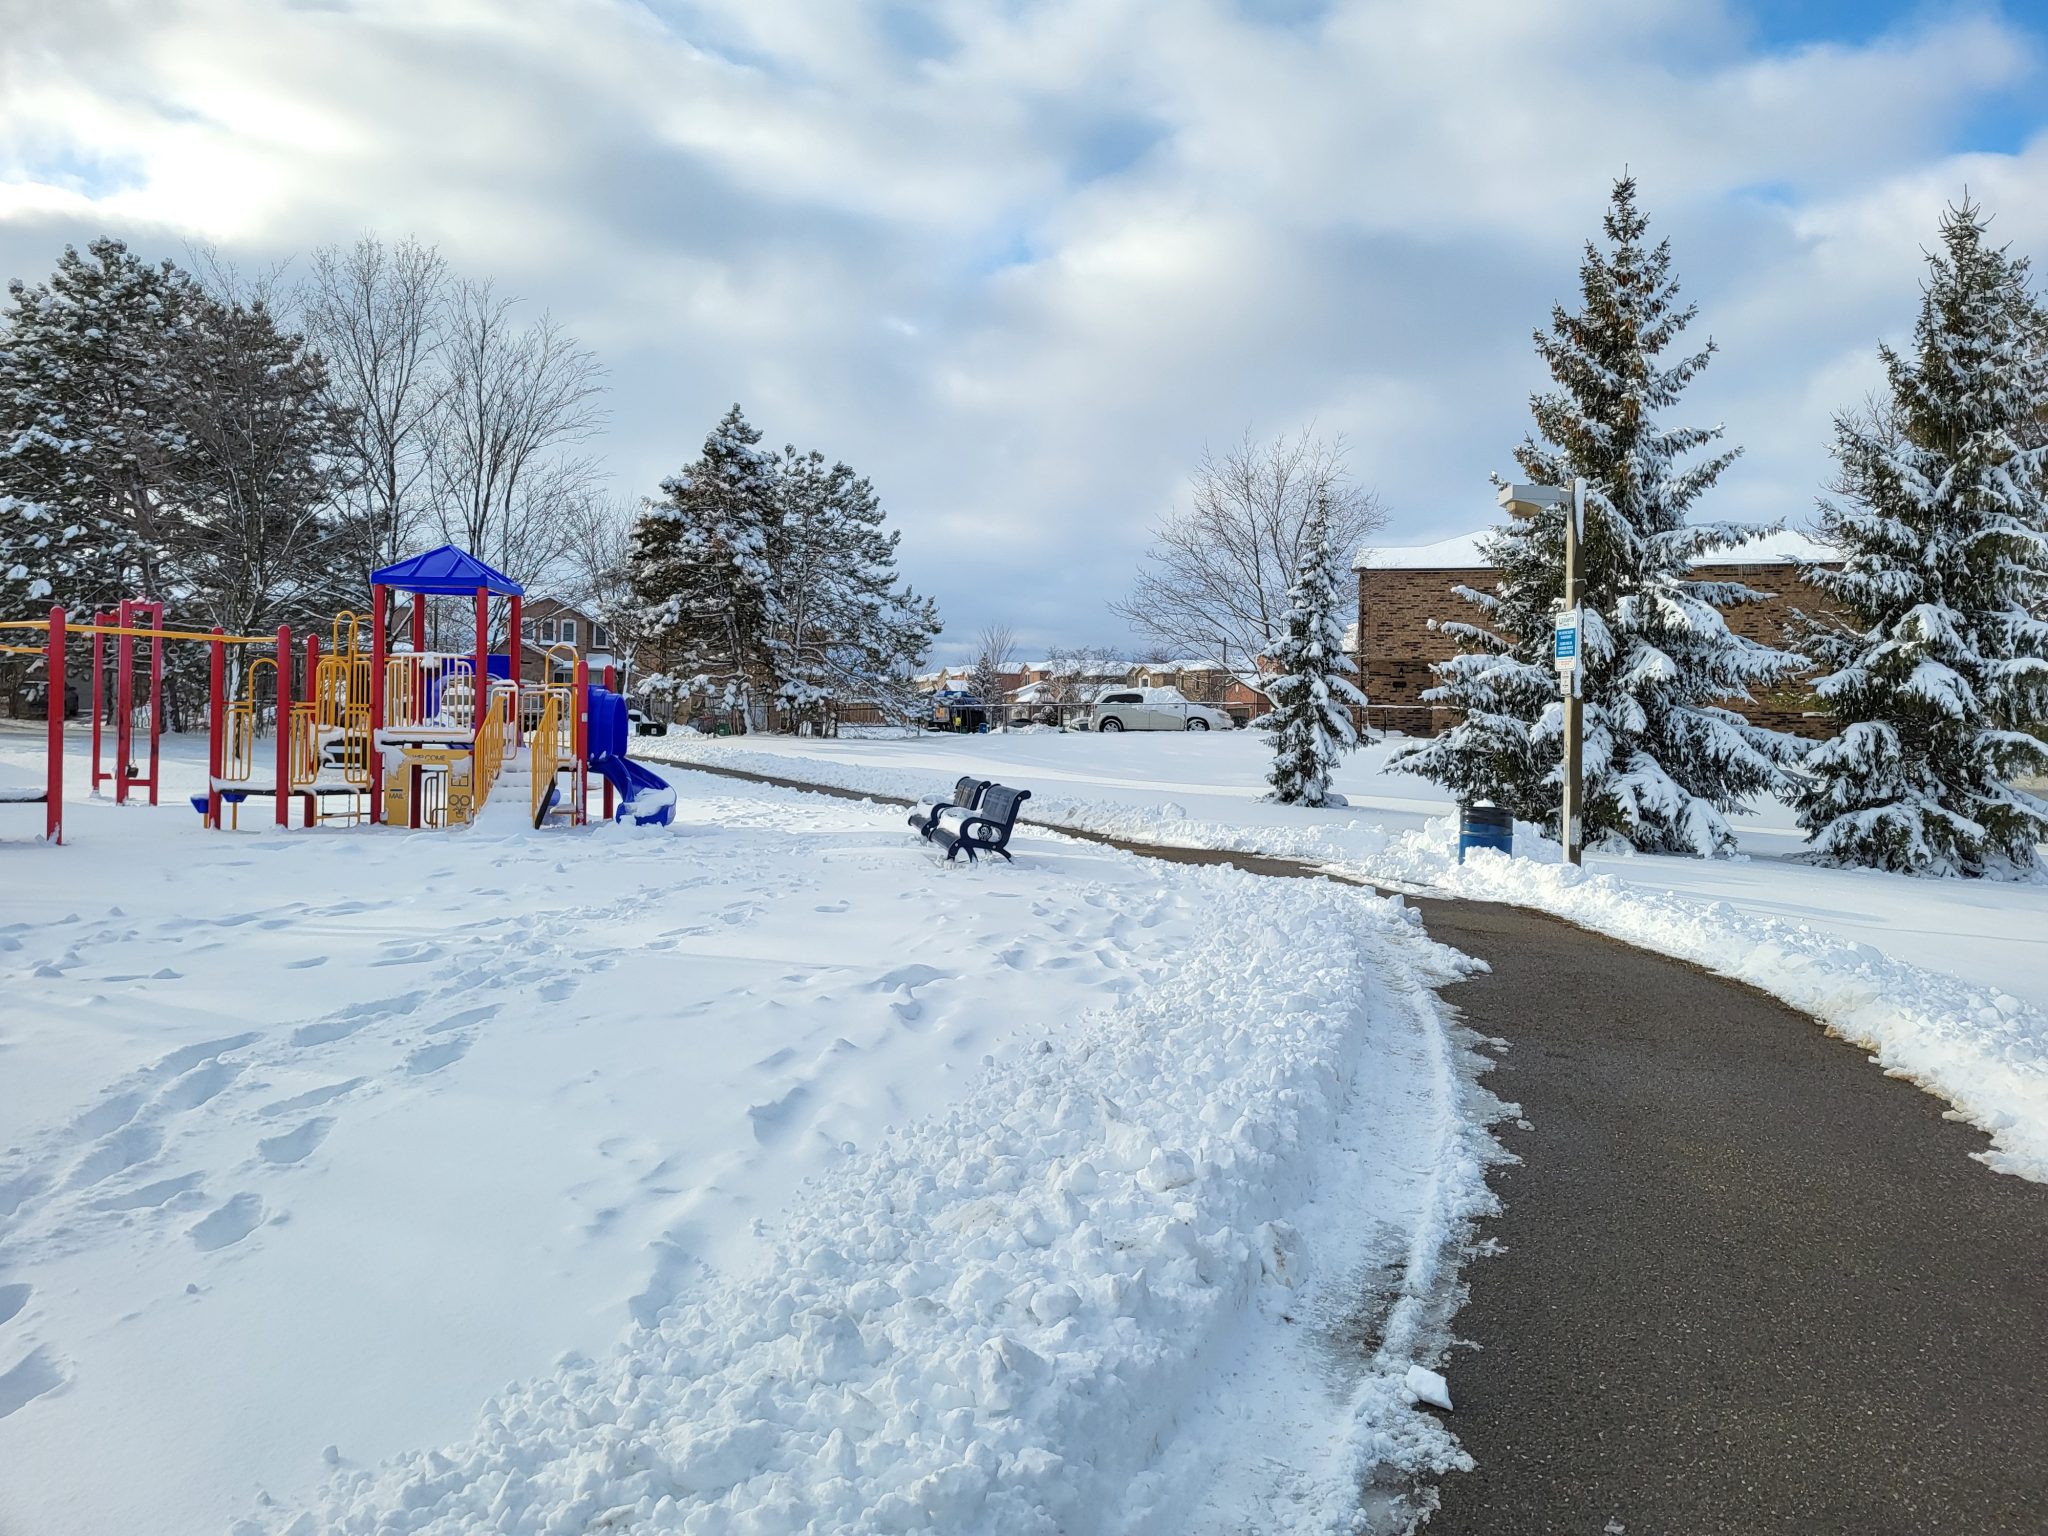 Winter snow along with beautiful nature. Snowy school yard, sidewalk on right curving across to the left behind some playground equipment.